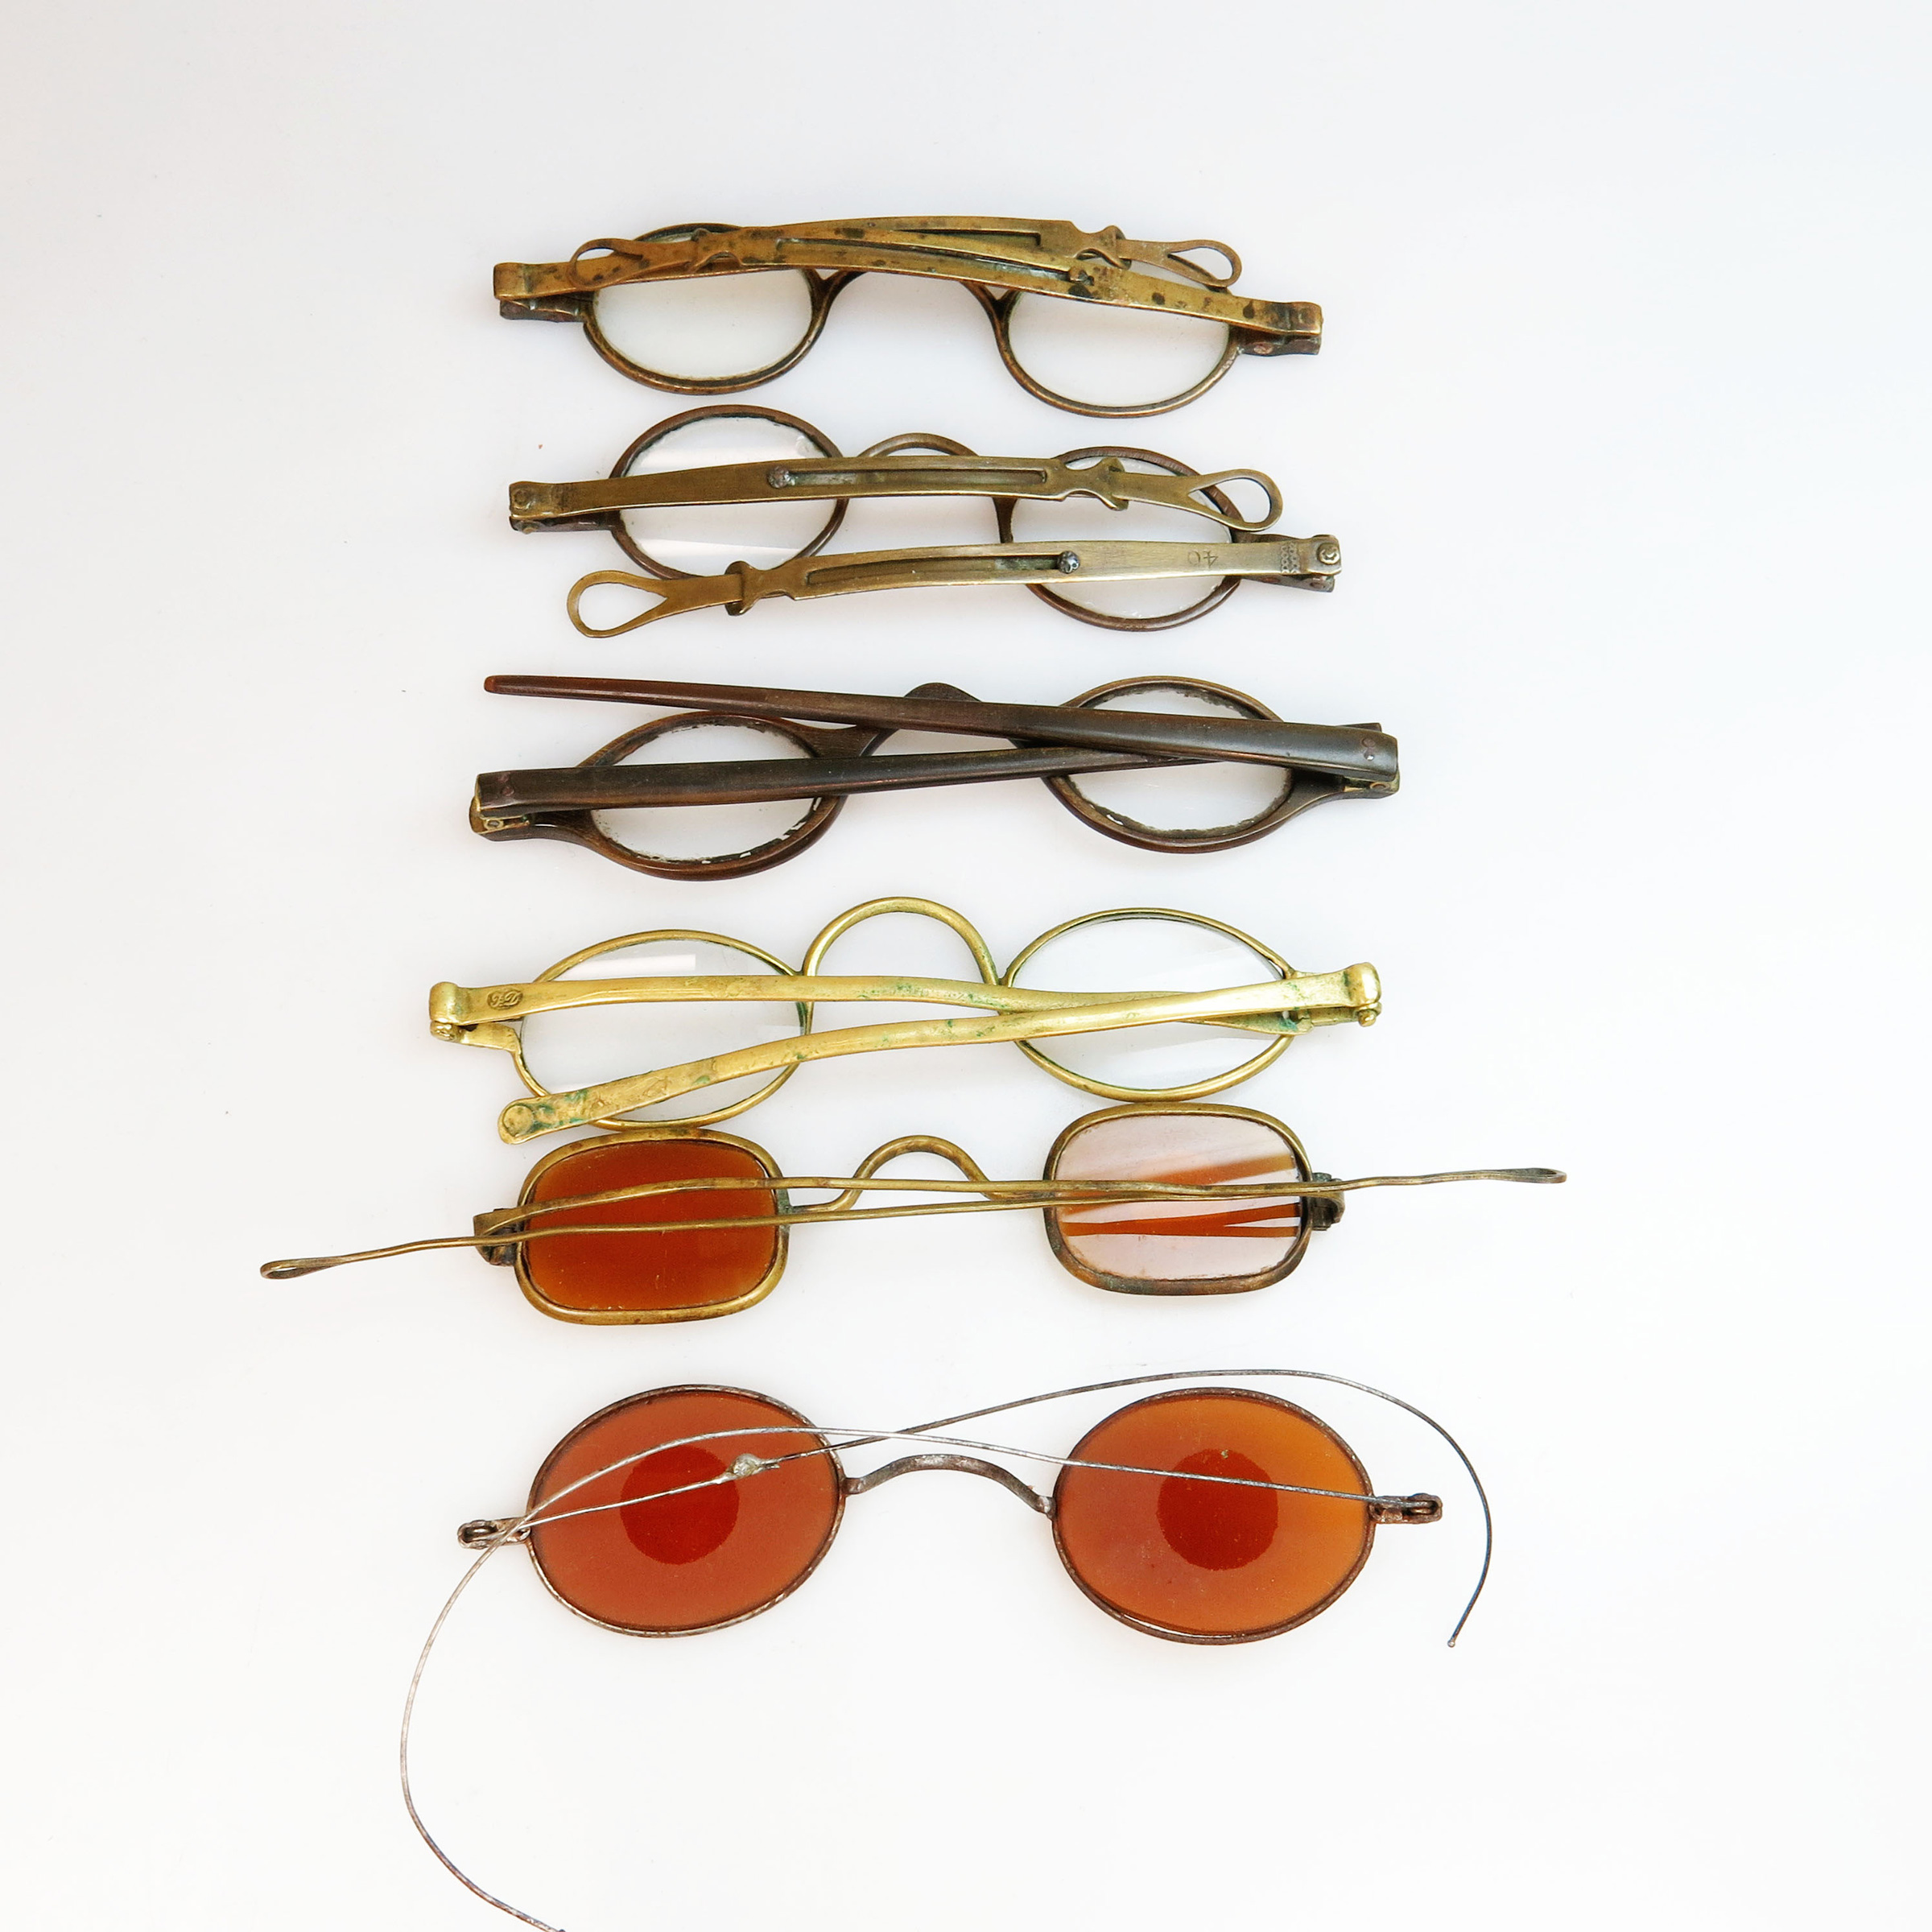 6 Pairs Of 18th & 19th Century Spectacles